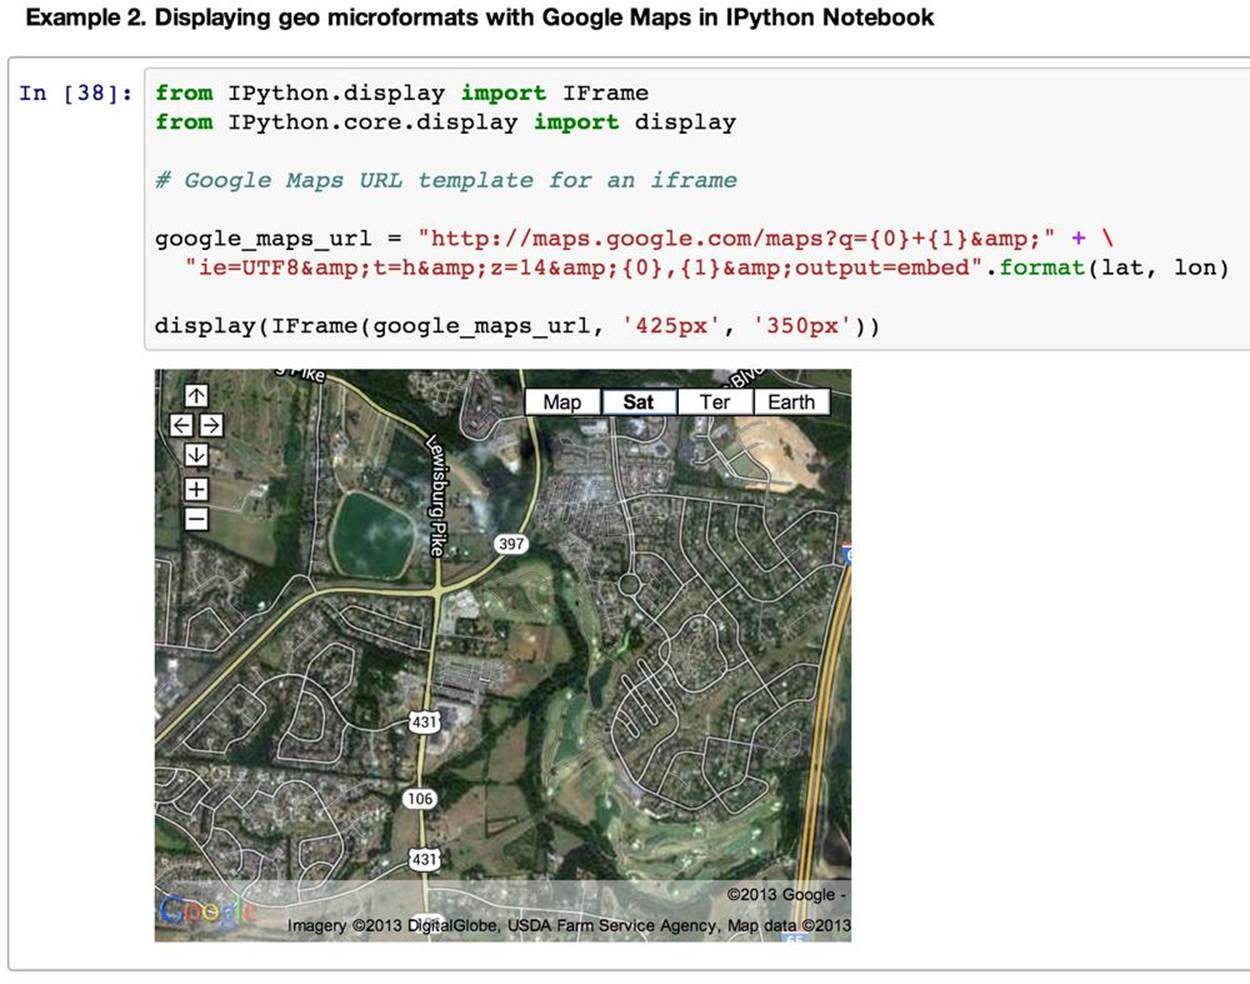 IPython Notebook’s ability to display inline frames can add a lot of interactivity and convenience to your experiments in data analysis